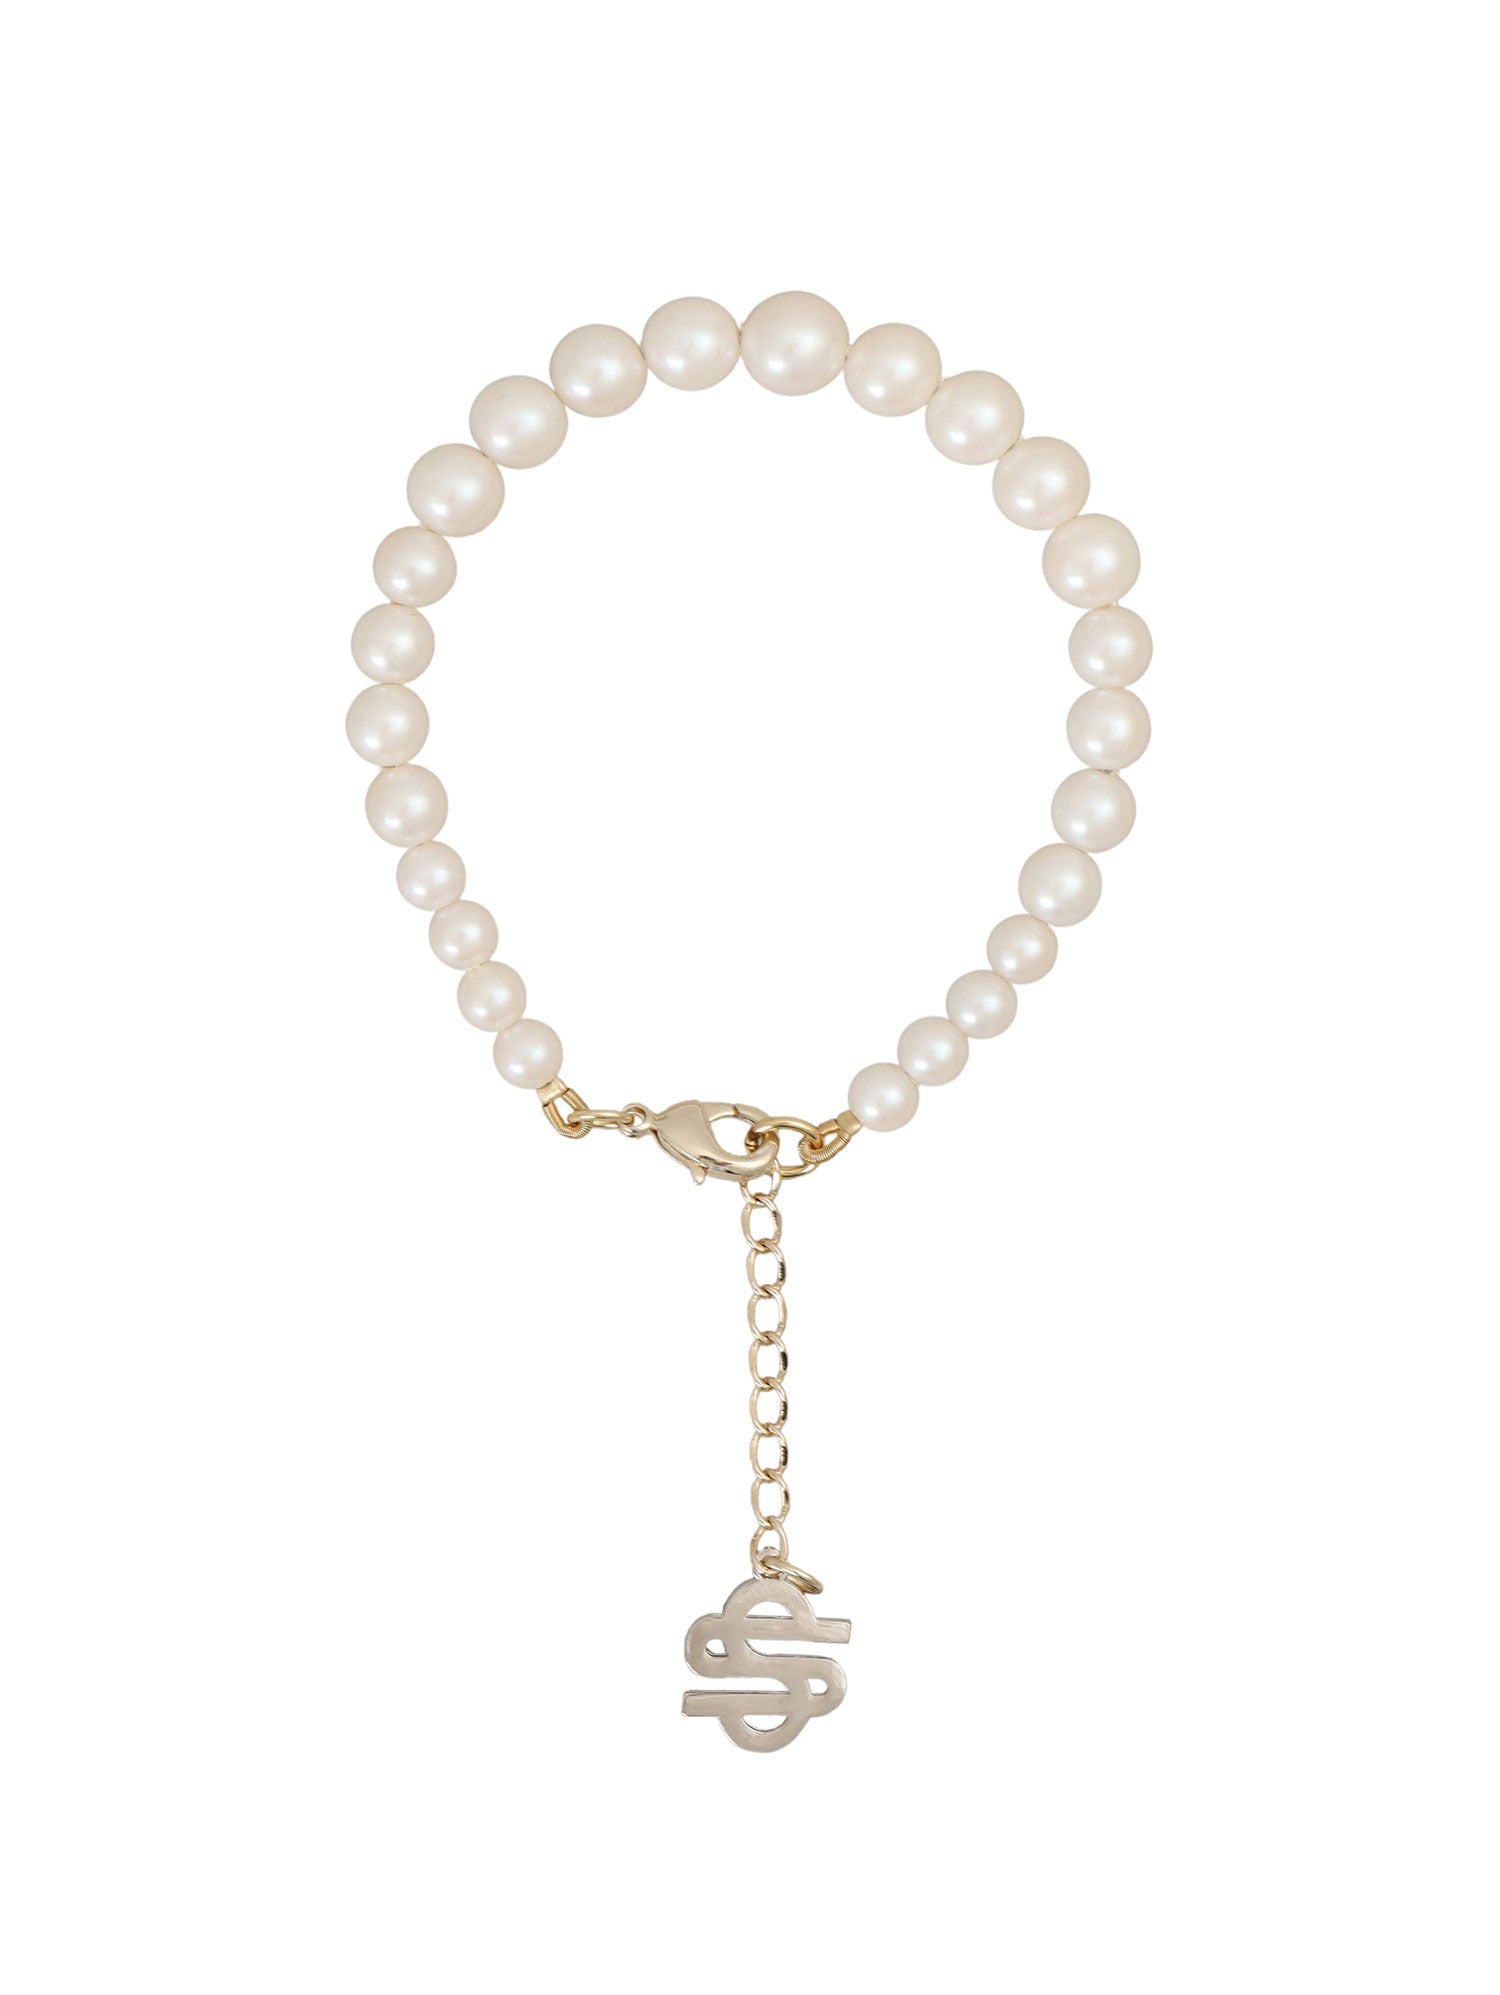 Pearl Bracelet with Charm